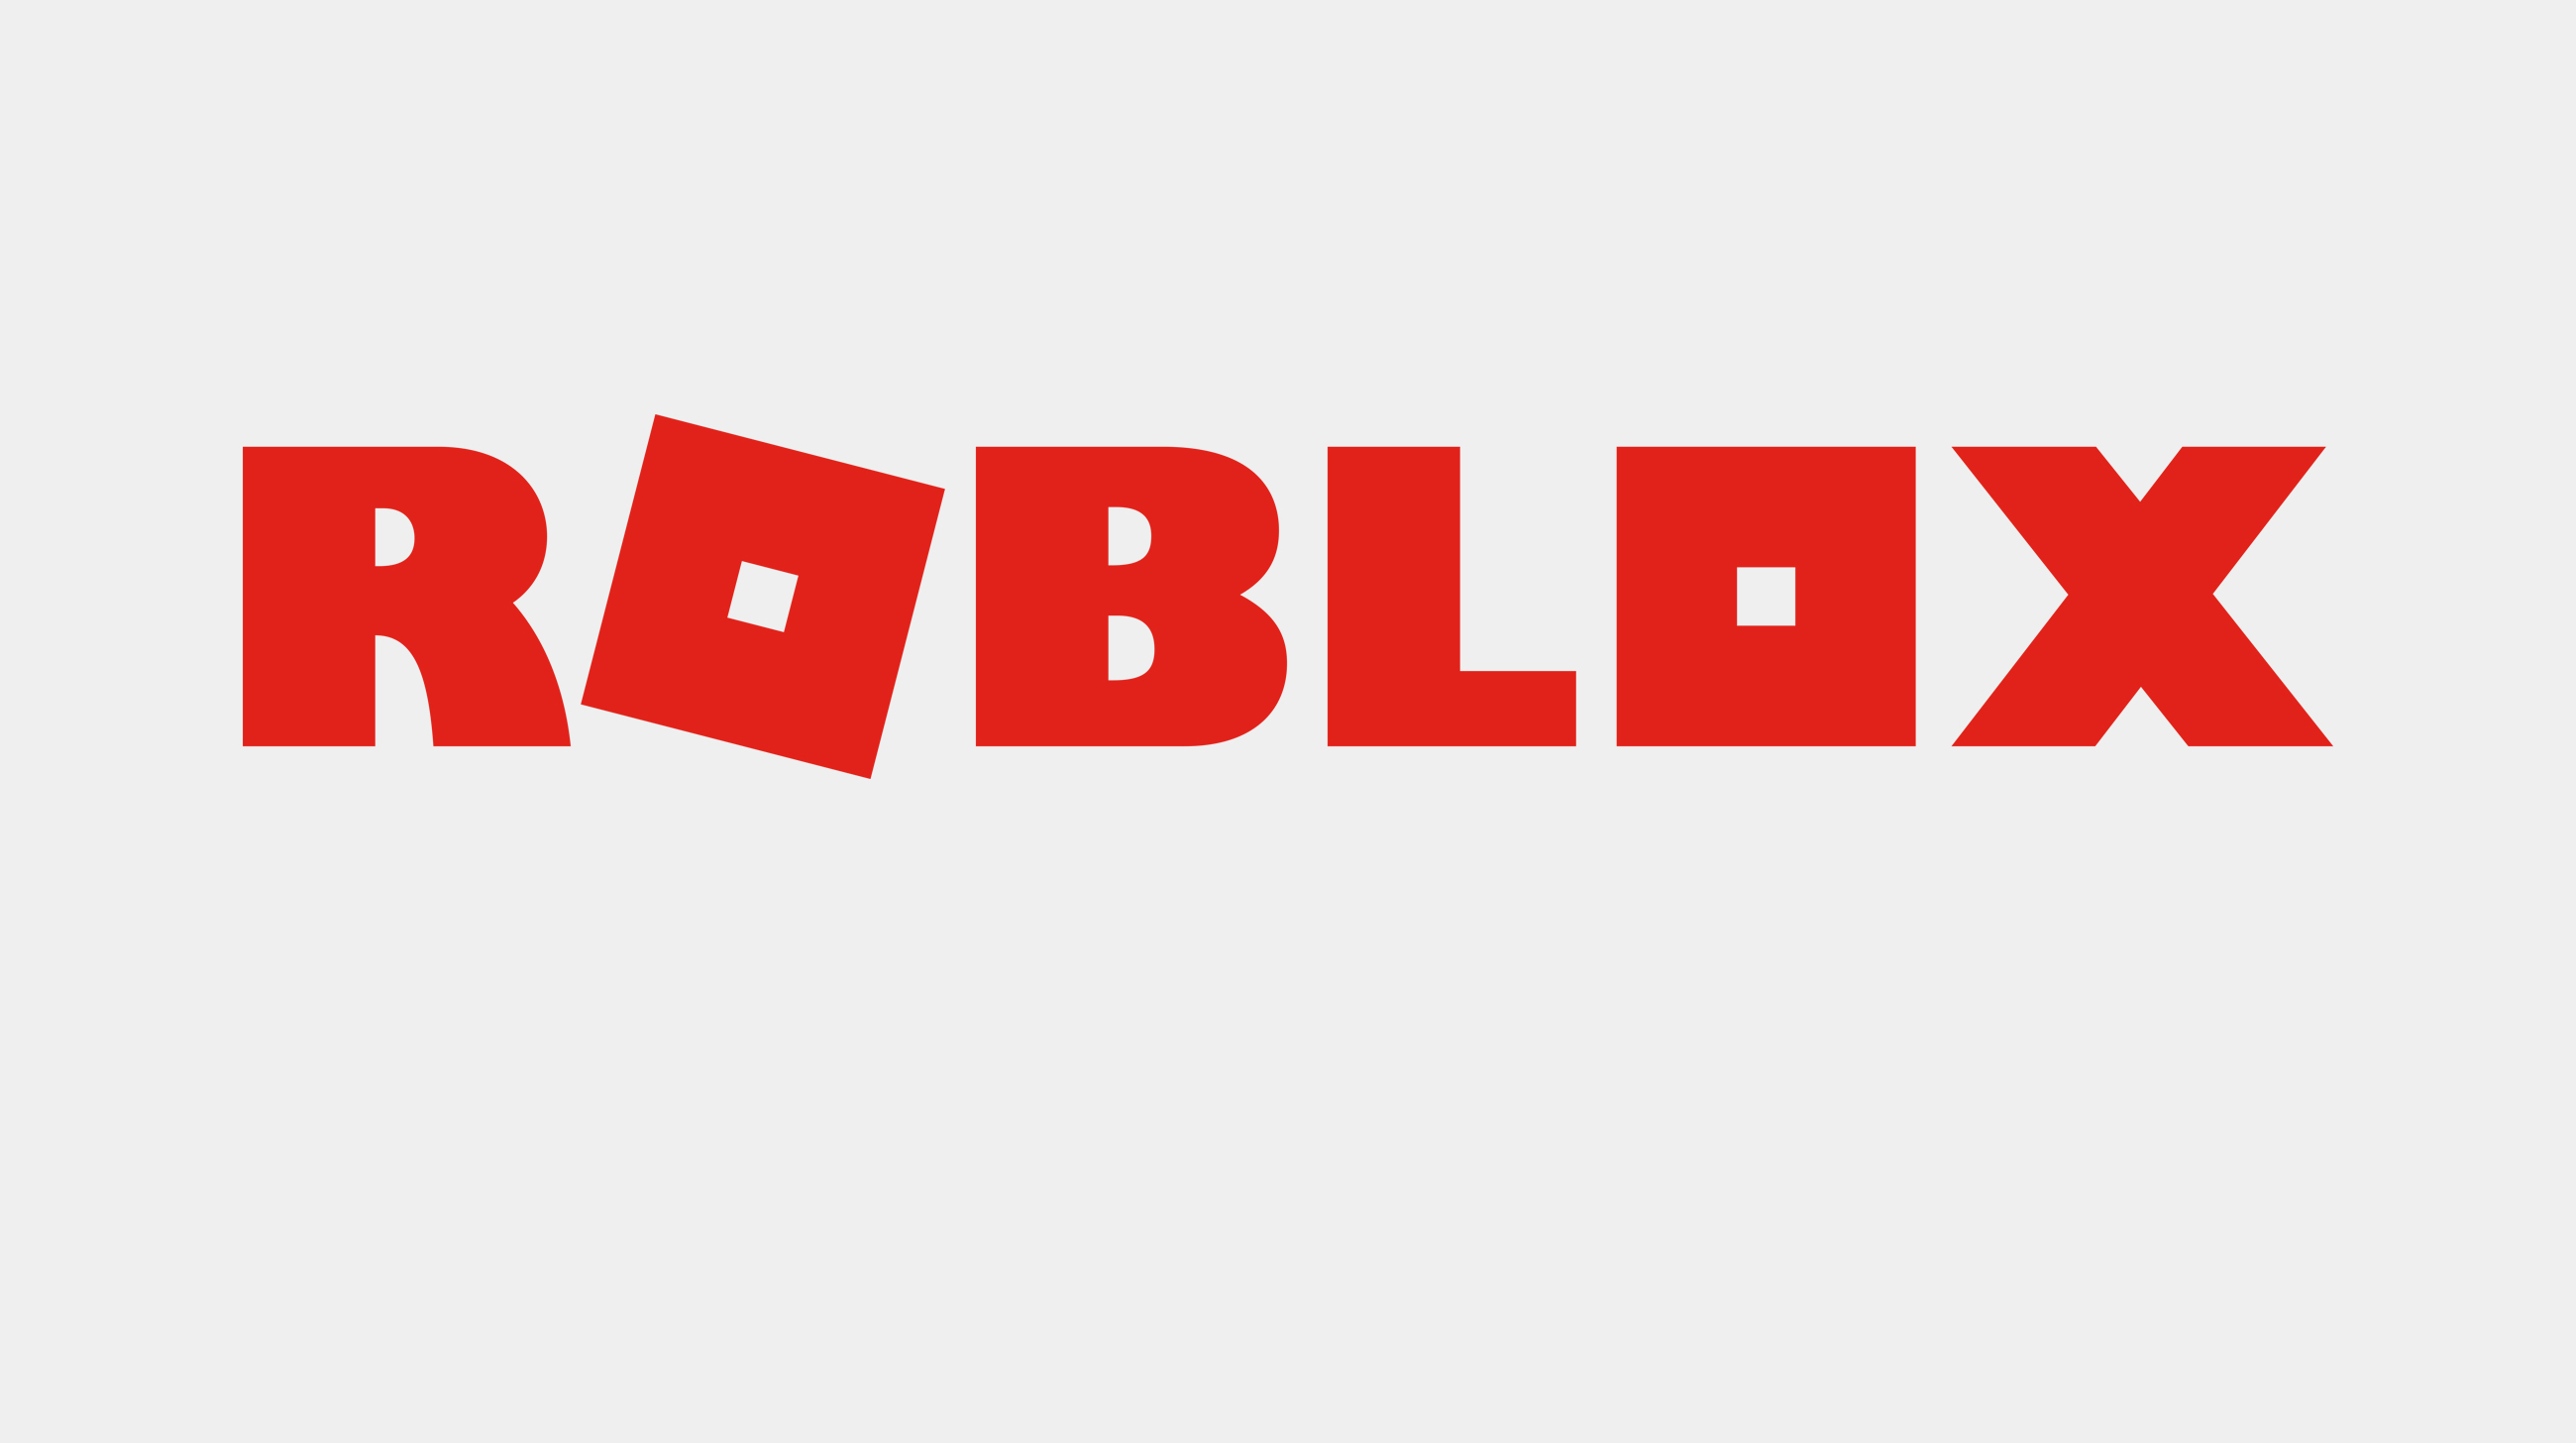 Quiz: What Roblox Face Are You? Accurate 500+ Faces Match